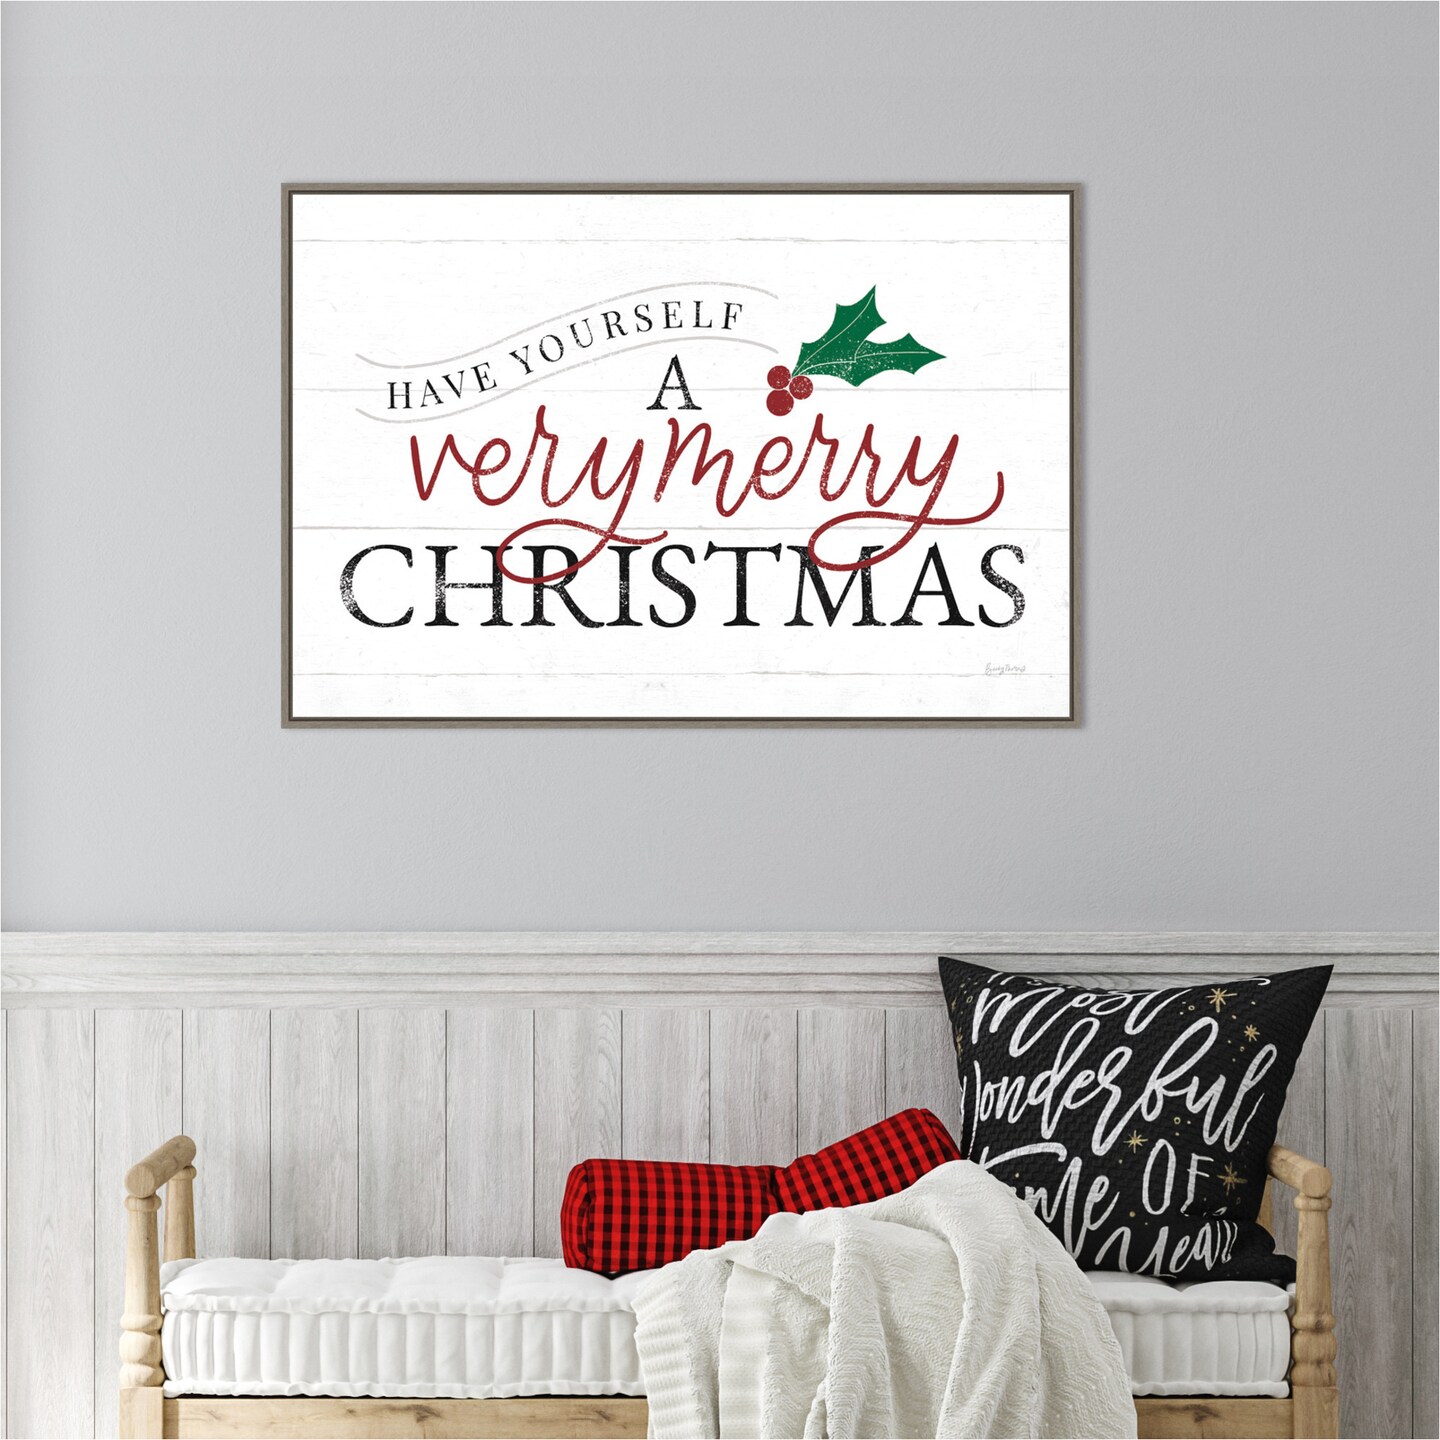 Vintage Christmas IV RG by Becky Thorns 33-in. W x 23-in. H. Canvas Wall Art Print Framed in Grey